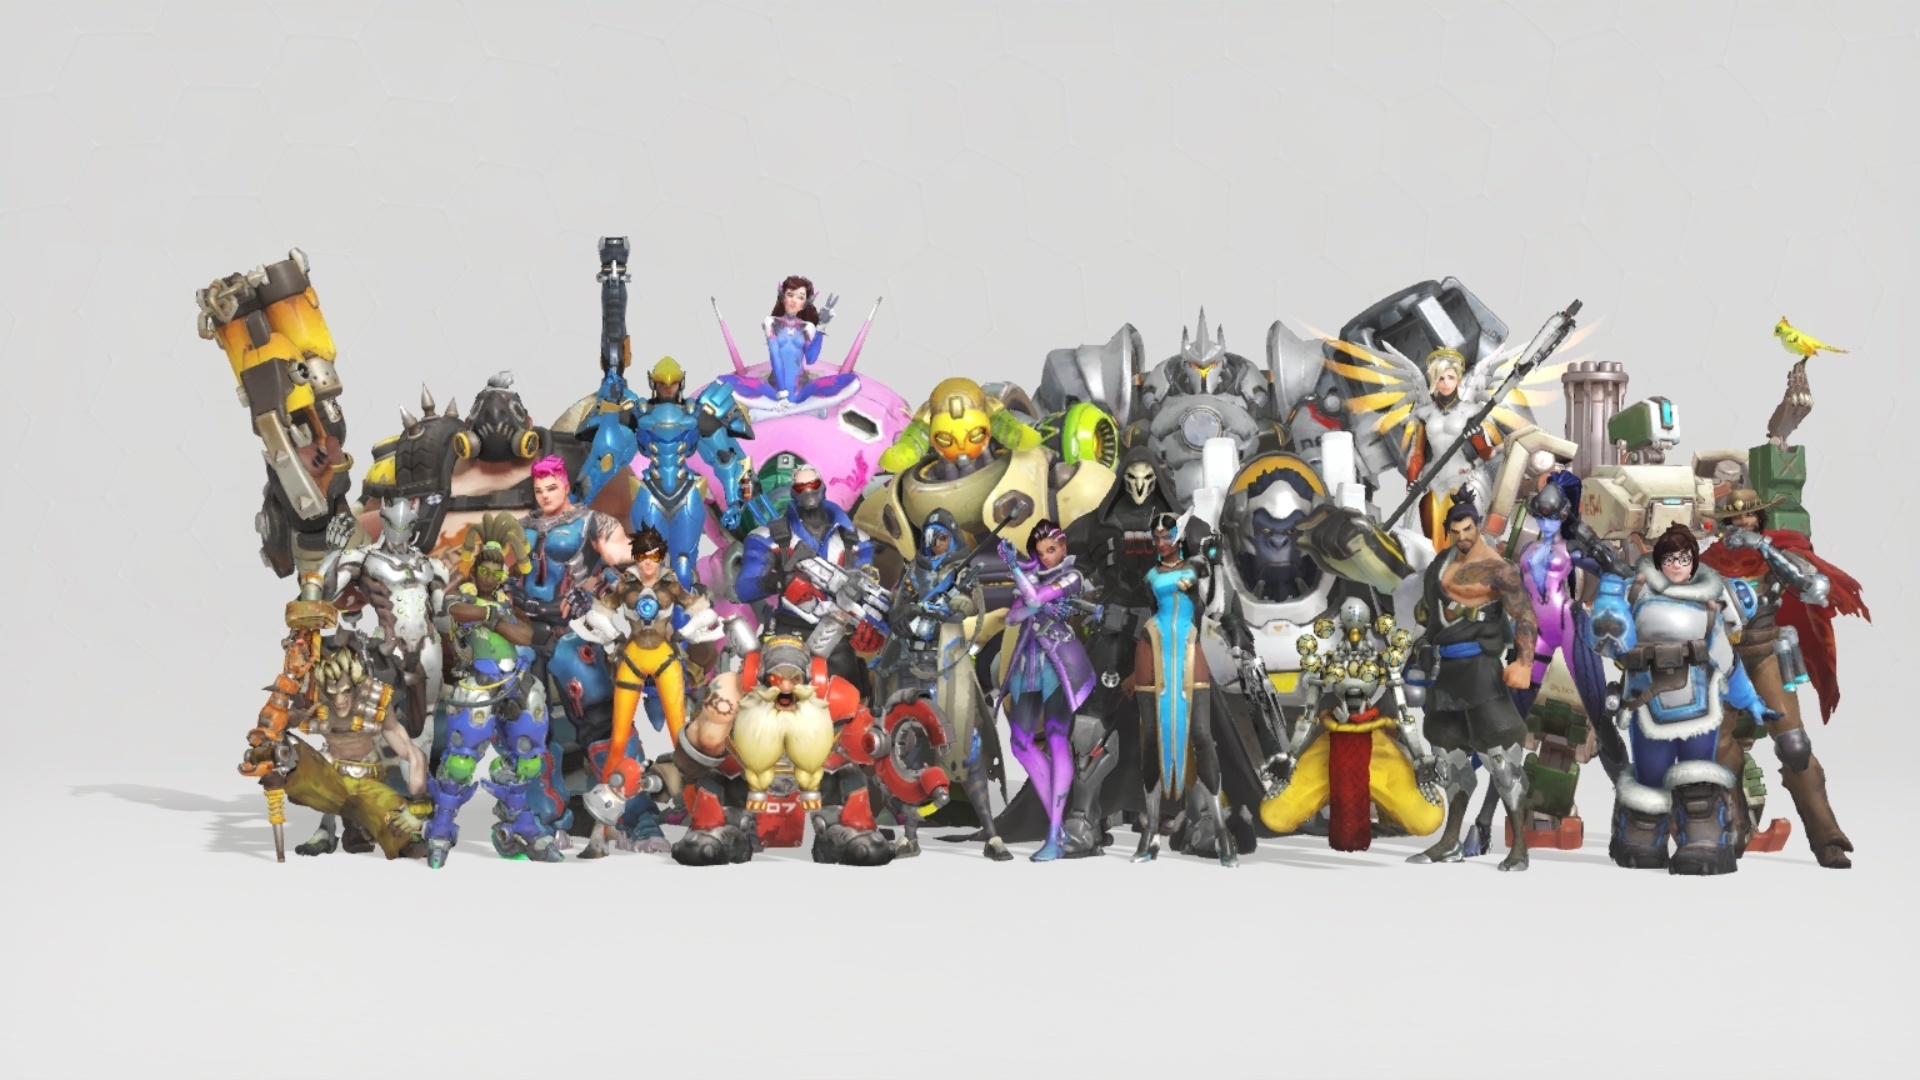 Overwatch Free Weekend May 26-29, Anniversary Event, Save $20 on